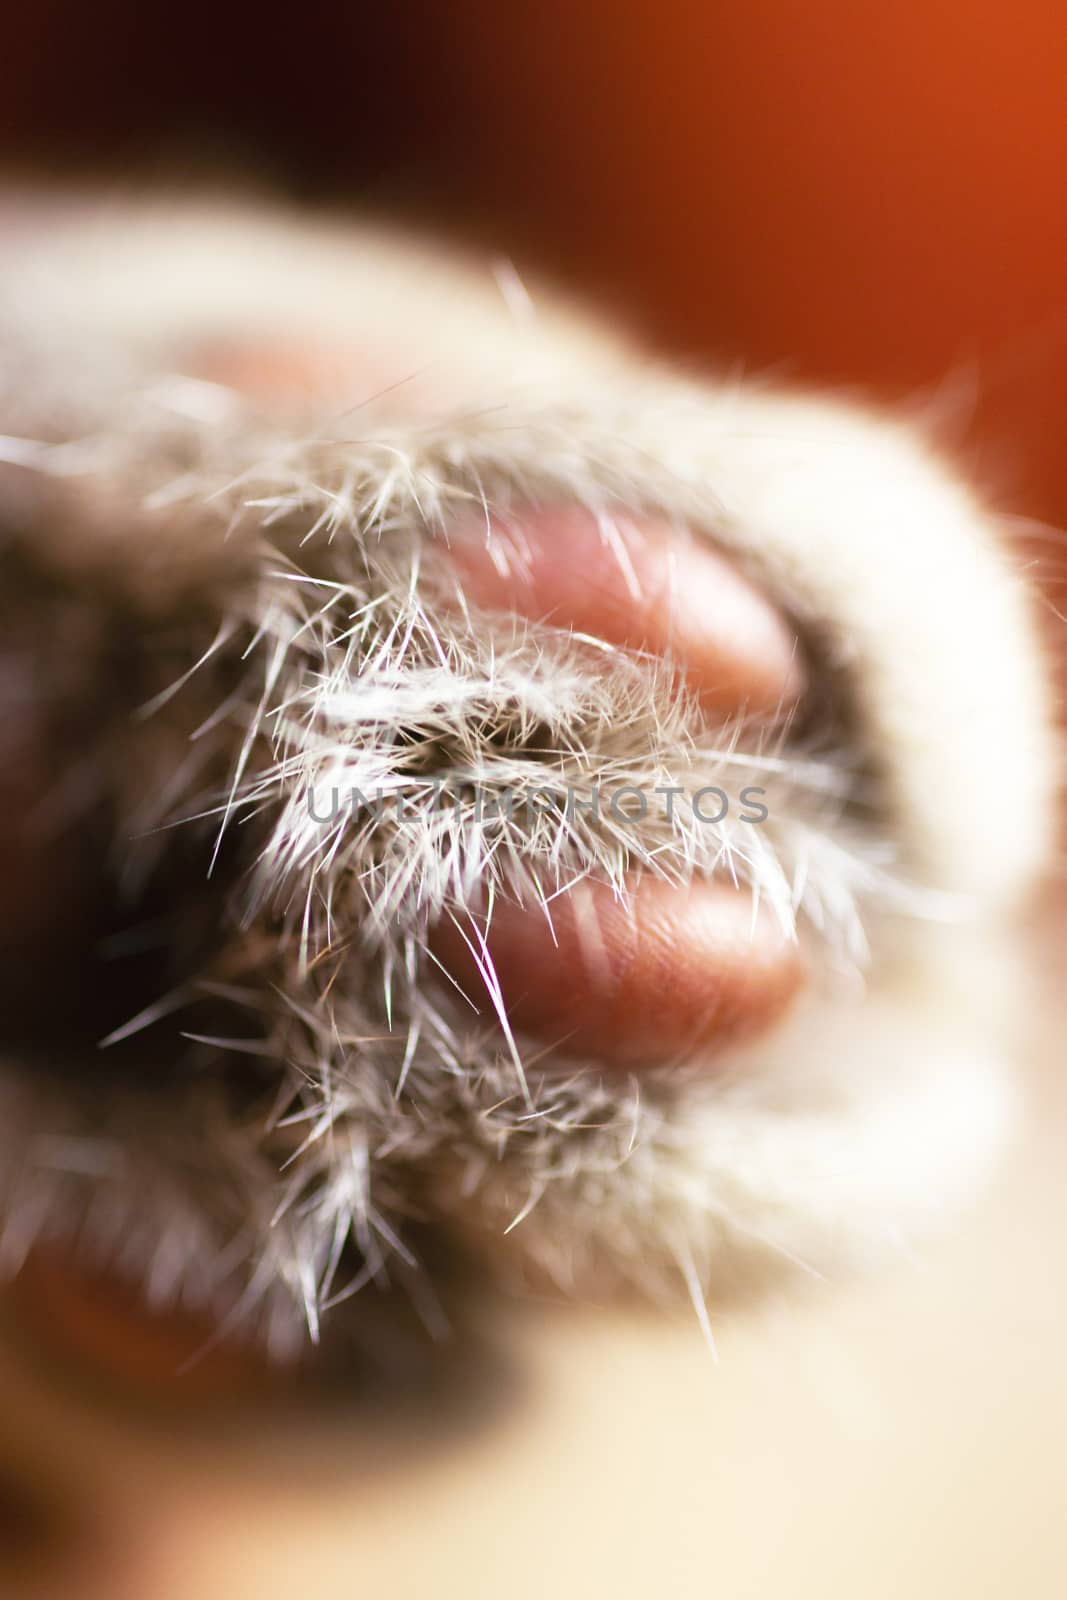 Clean cat paw closeup view. Relaxing cat photo with blurred background.